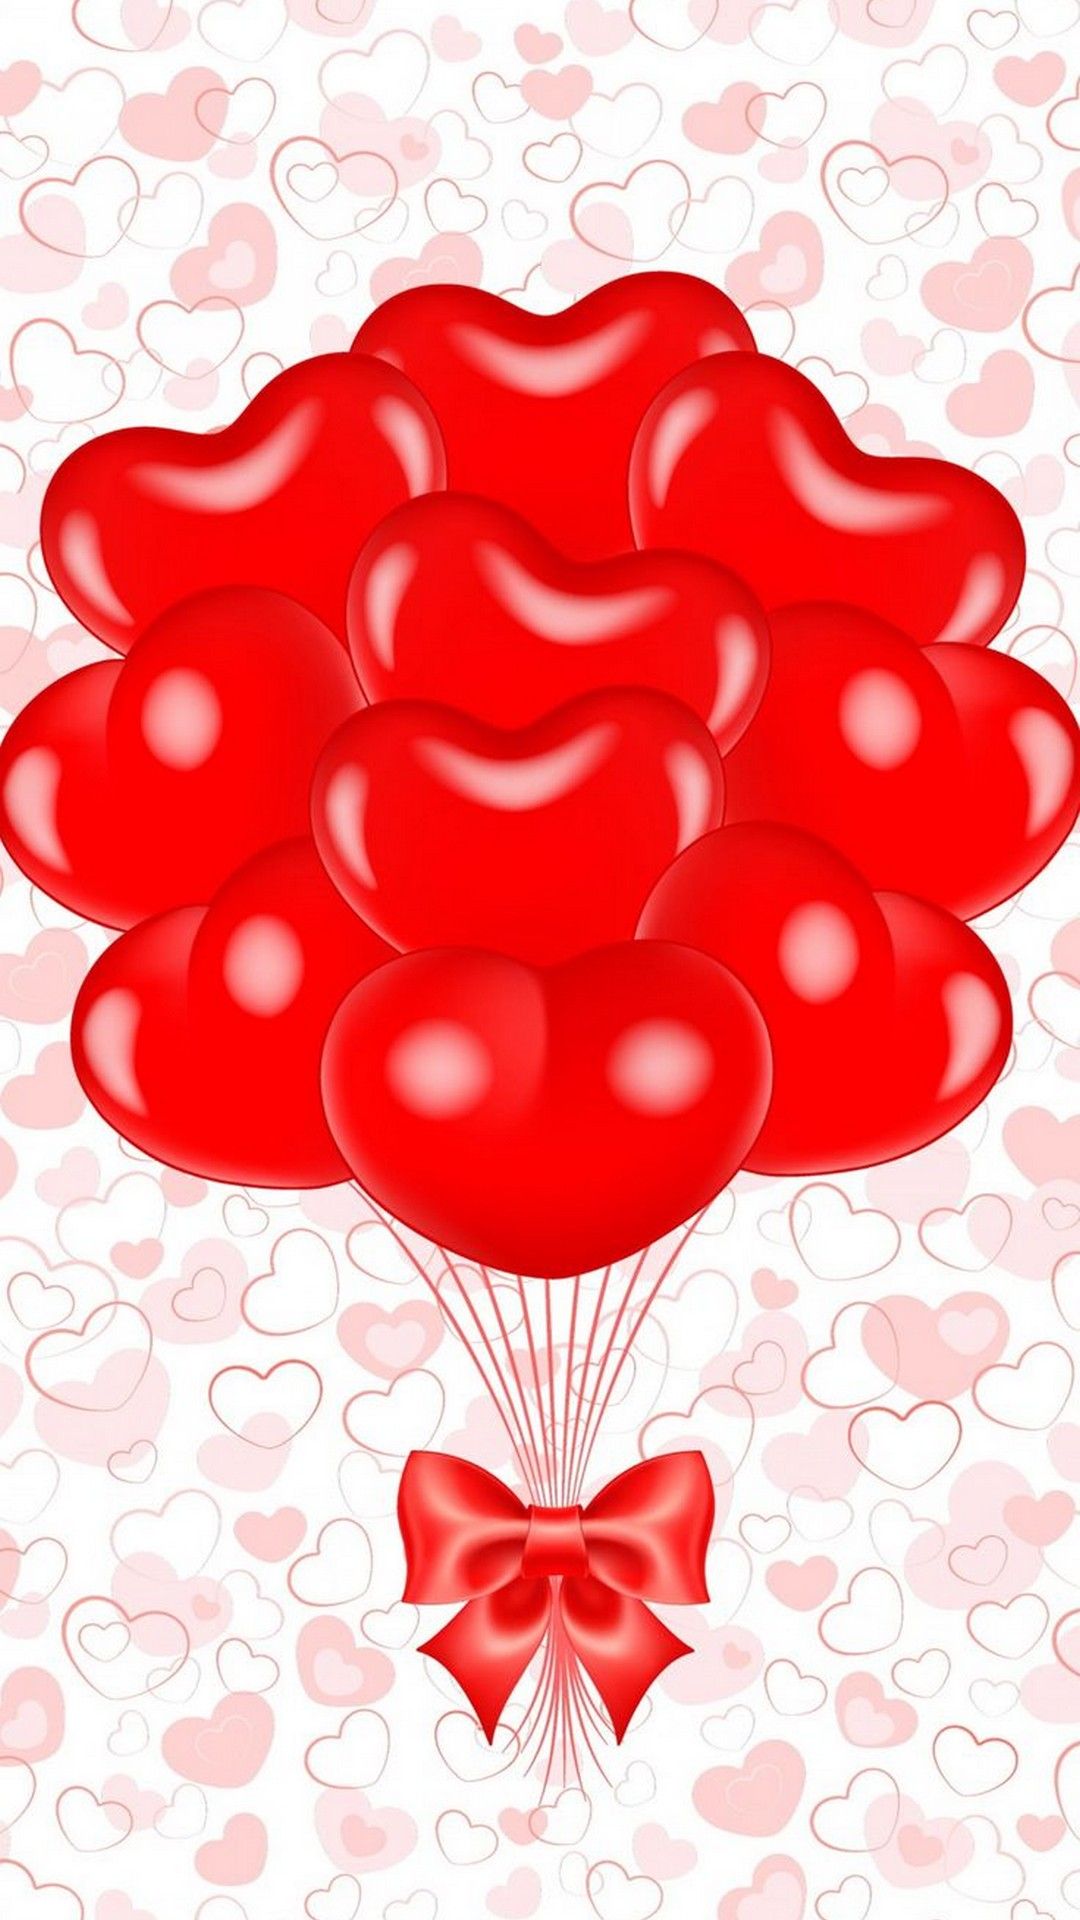 Valentines Day Wallpaper For Mobile iPhone Wallpaper. Heart iphone wallpaper, Valentines wallpaper, Smartphone wallpaper